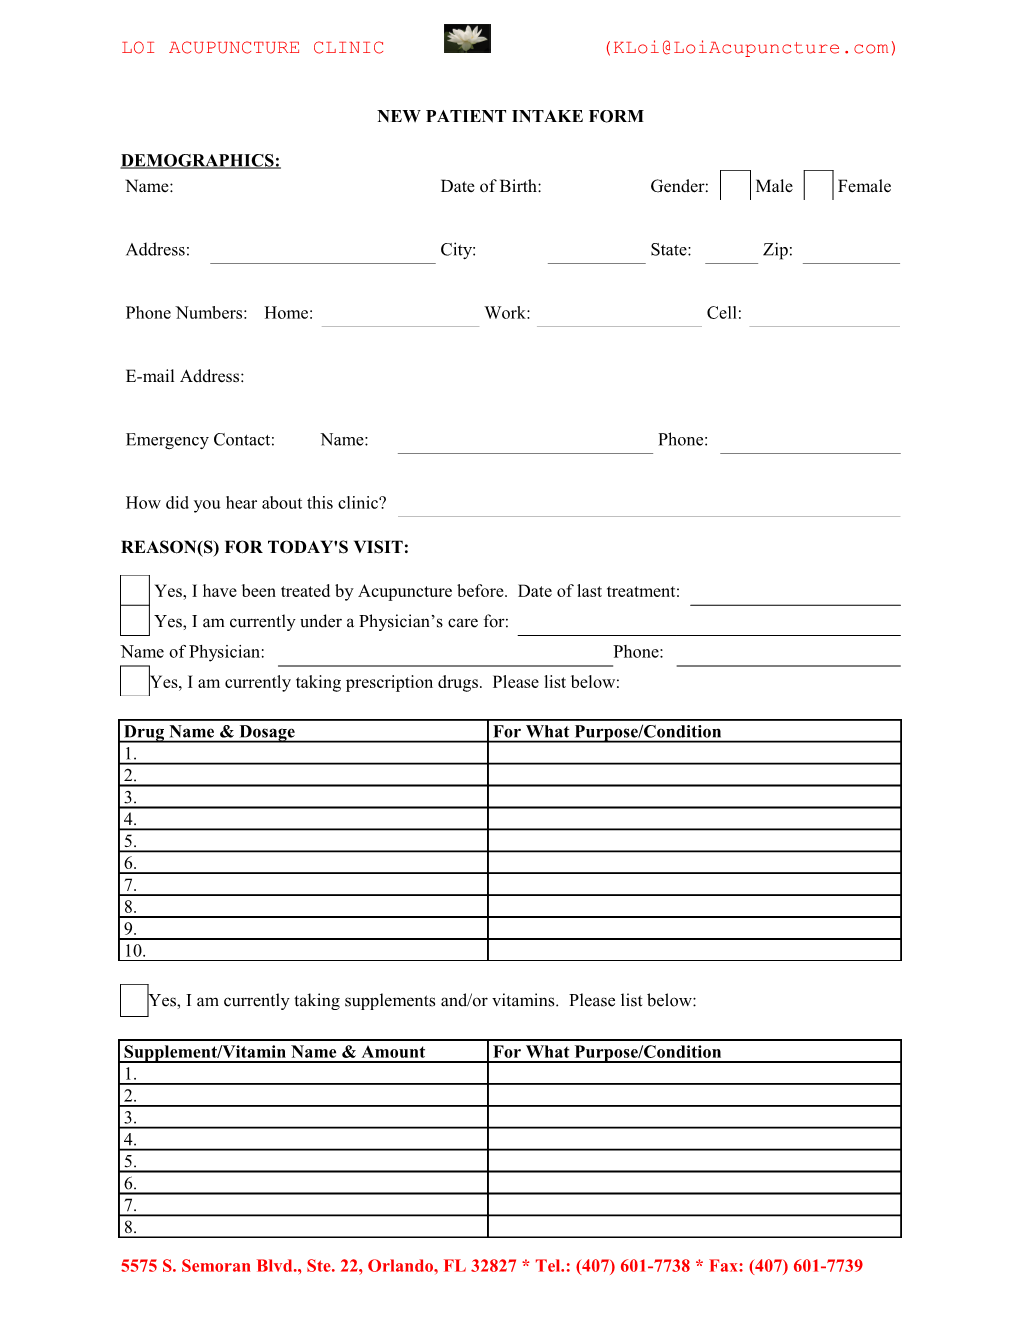 Acupuncture New Patient Intake Form